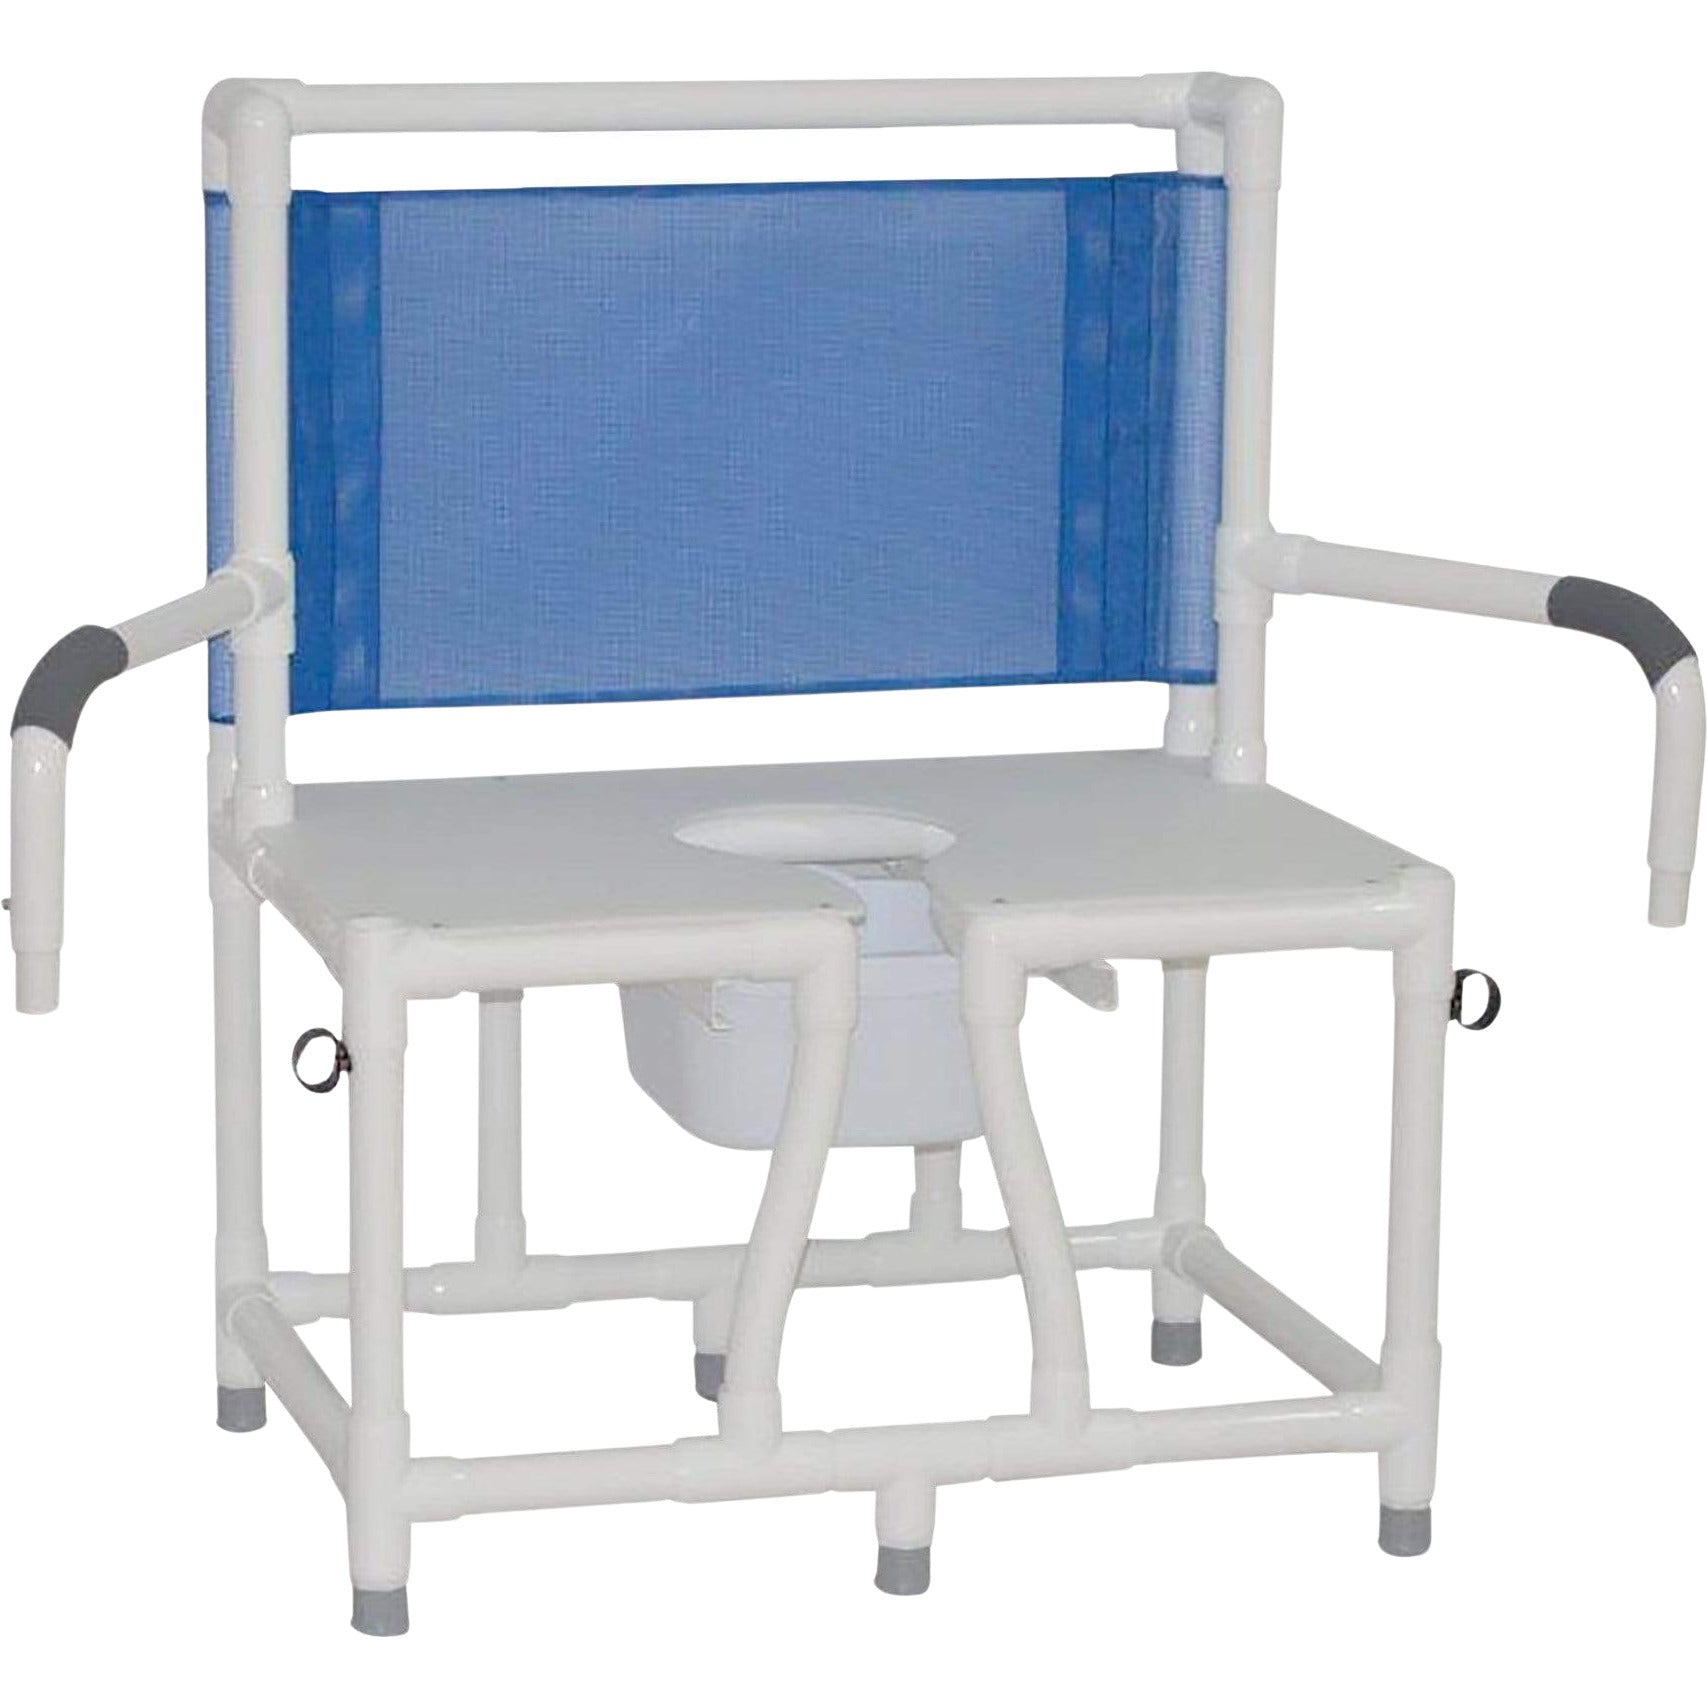 ConvaQuip Bedside Commodes - PVC Bariatric Bedside Commode - Swing Away Arms Model 130-C10-DDA by ConvaQuip